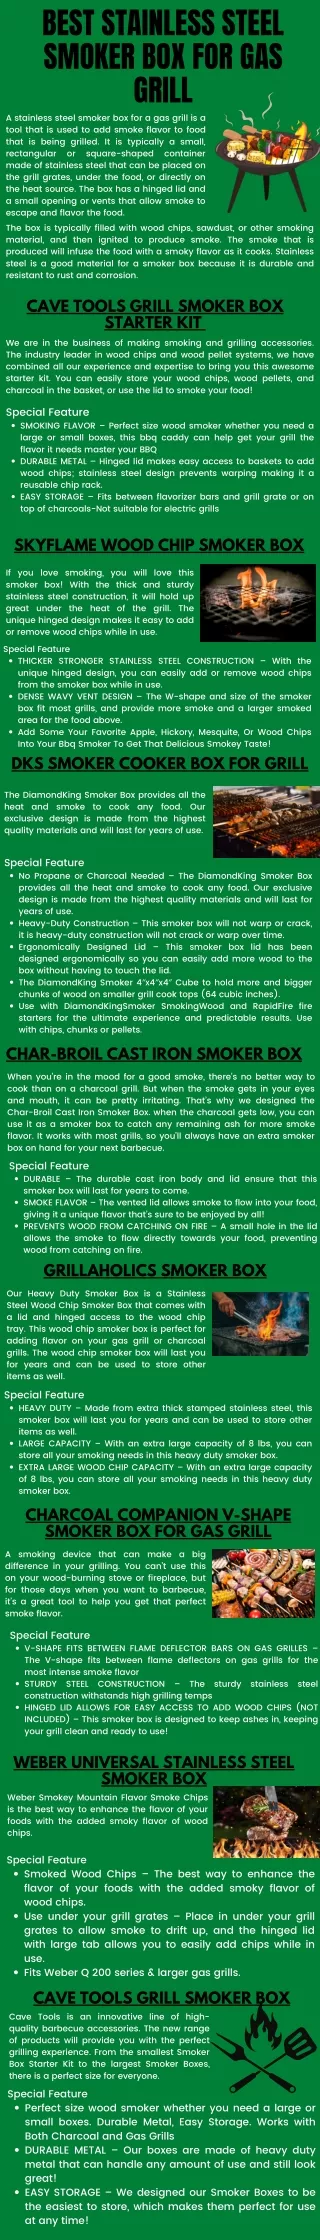 Best Stainless Steel Smoker Box For Gas Grill